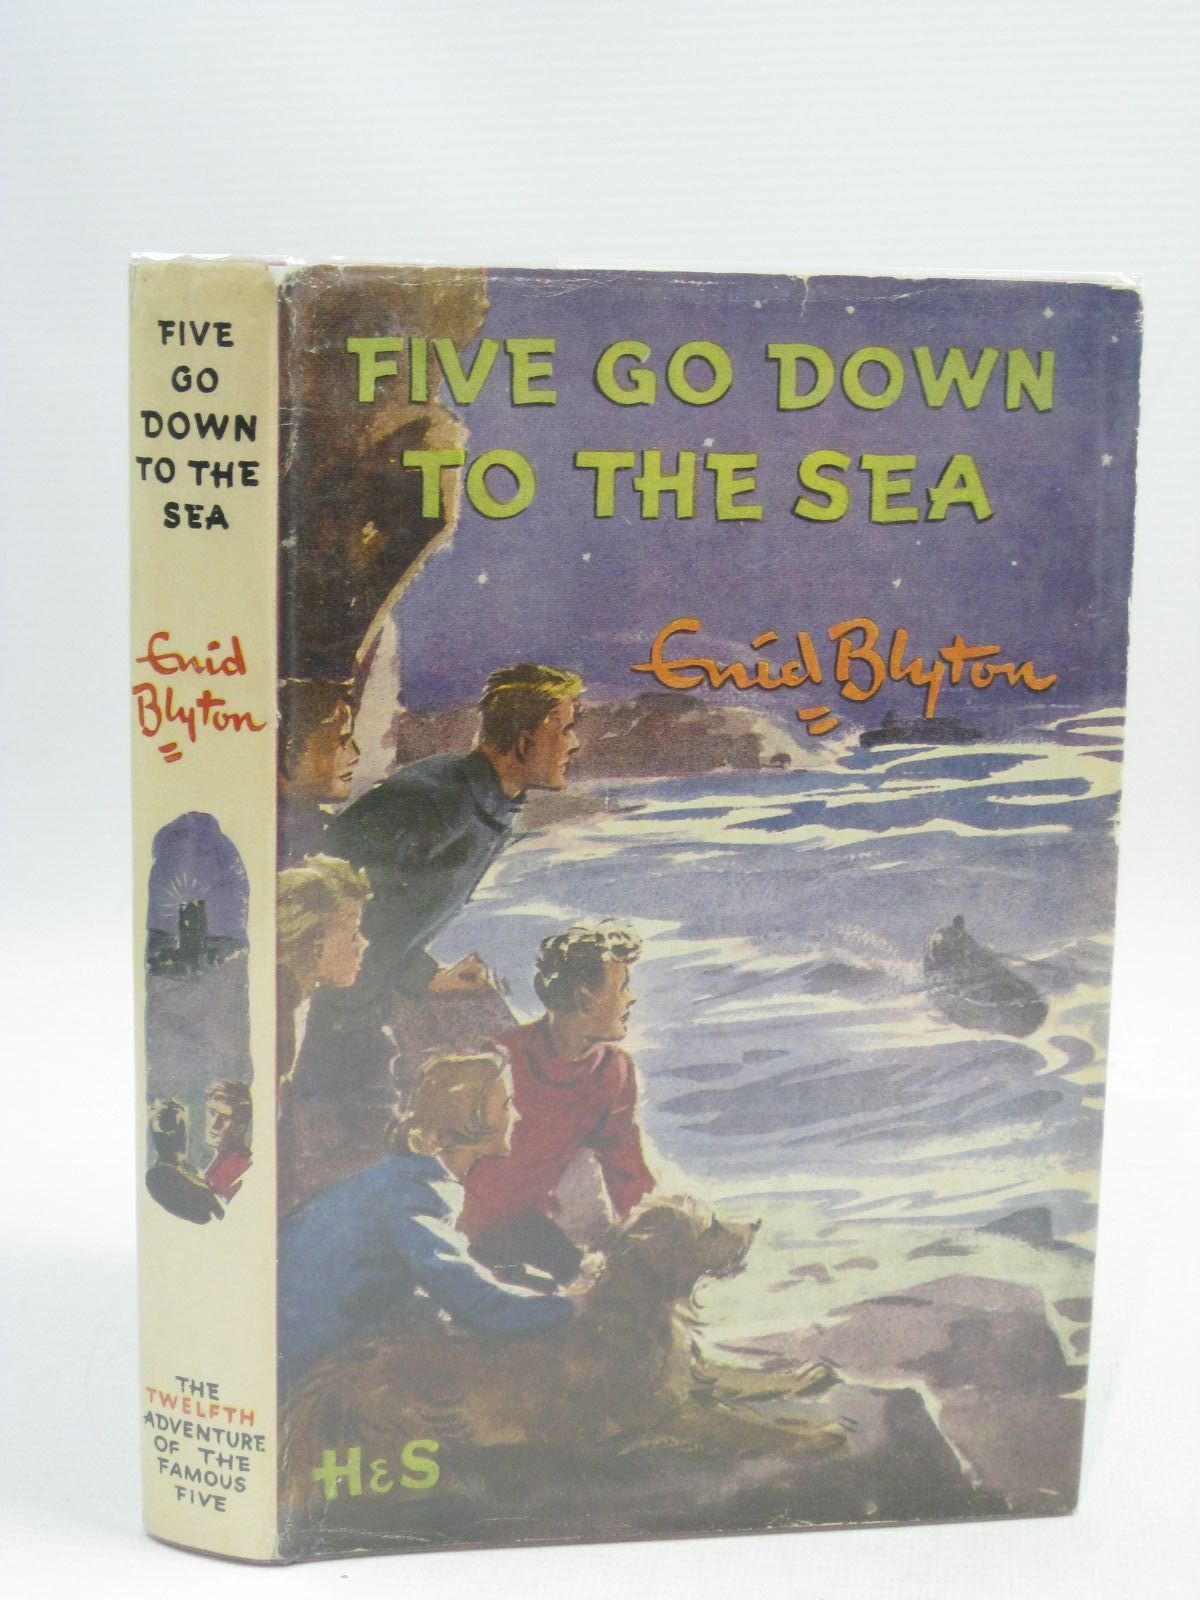 Cover of FIVE GO DOWN TO THE SEA by Enid Blyton